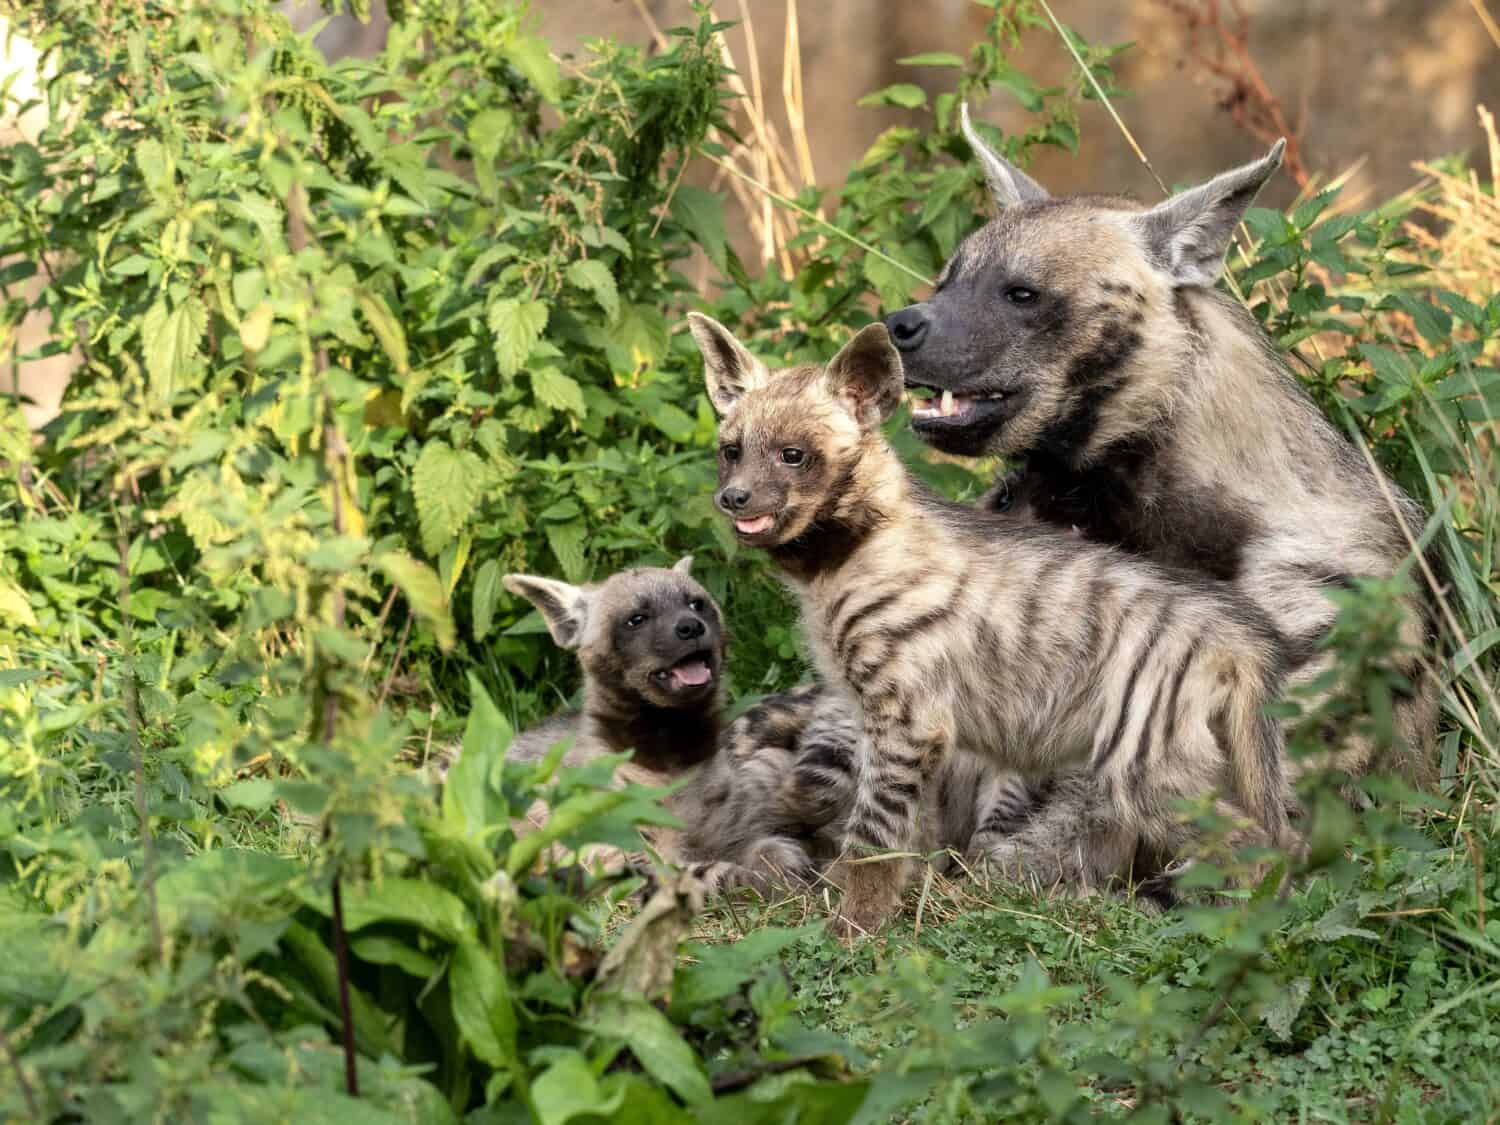 Striped hyena and young cubs